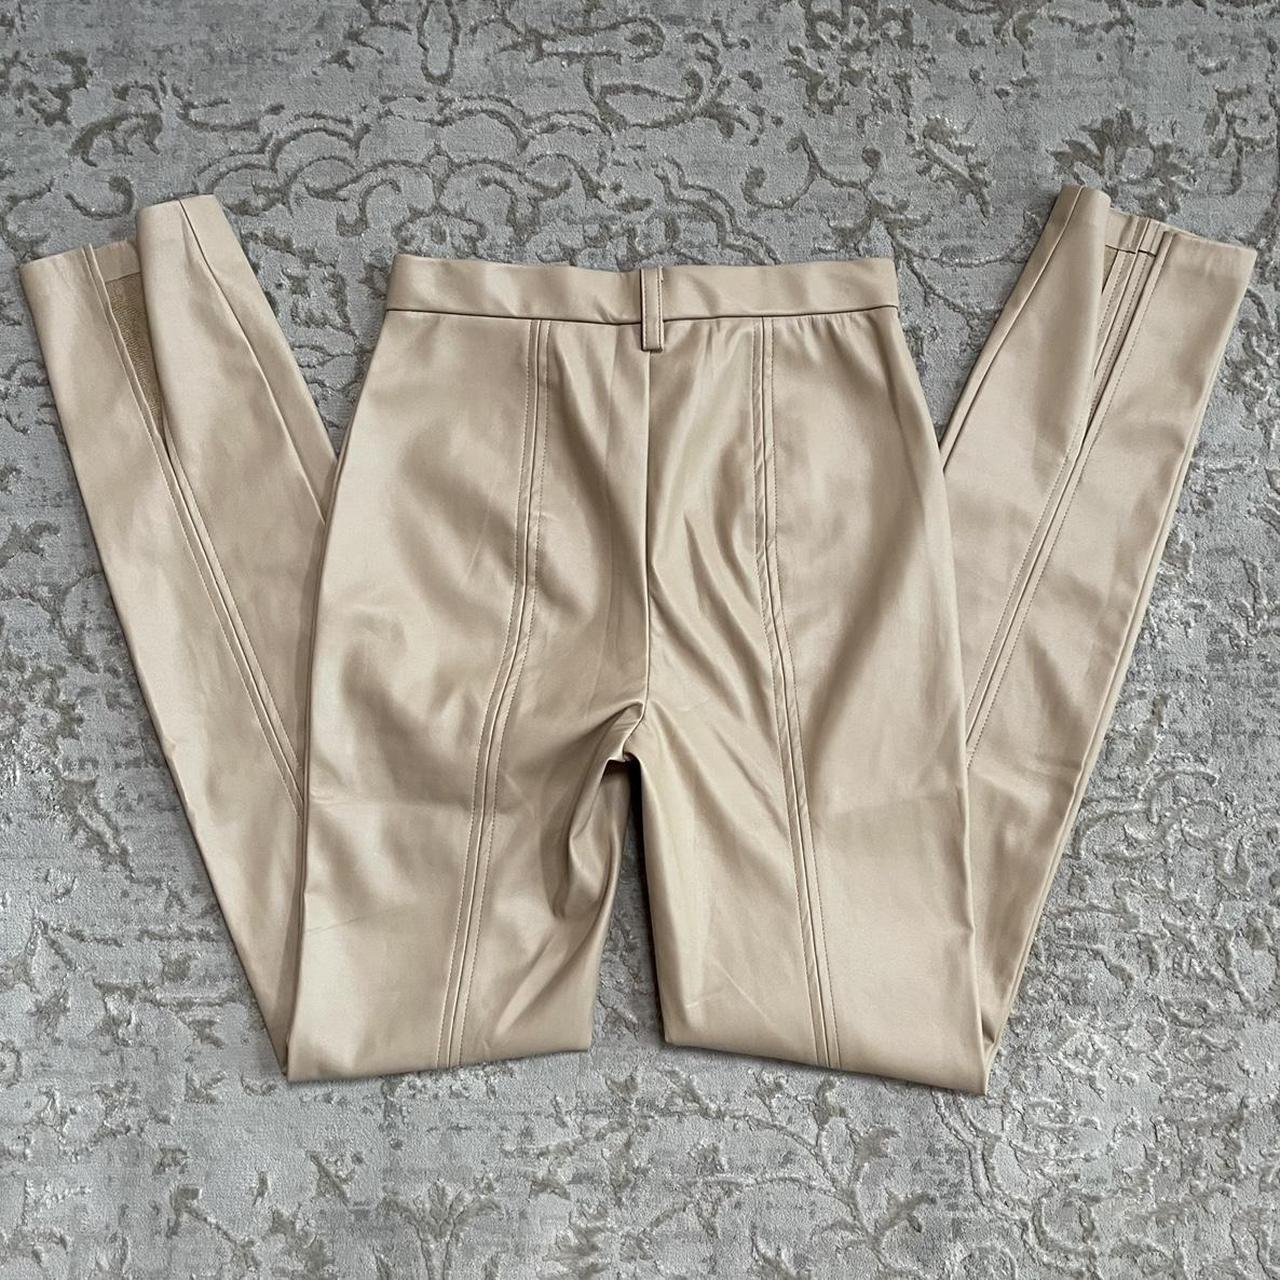 Leather Pants For Women - Bloomingdale's